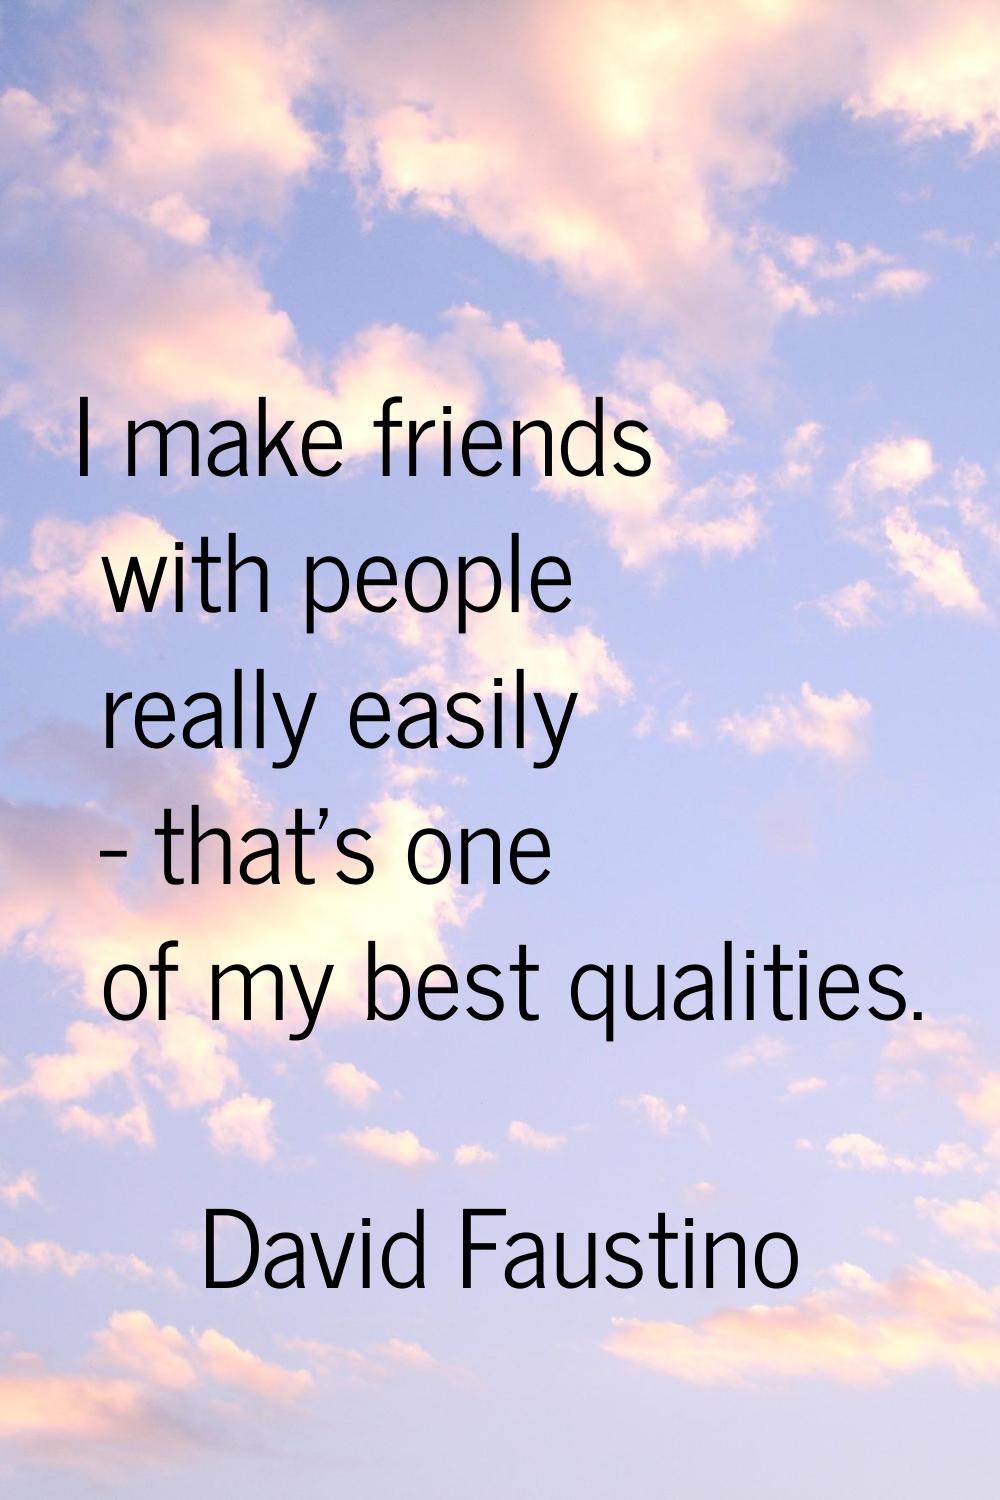 I make friends with people really easily - that's one of my best qualities.